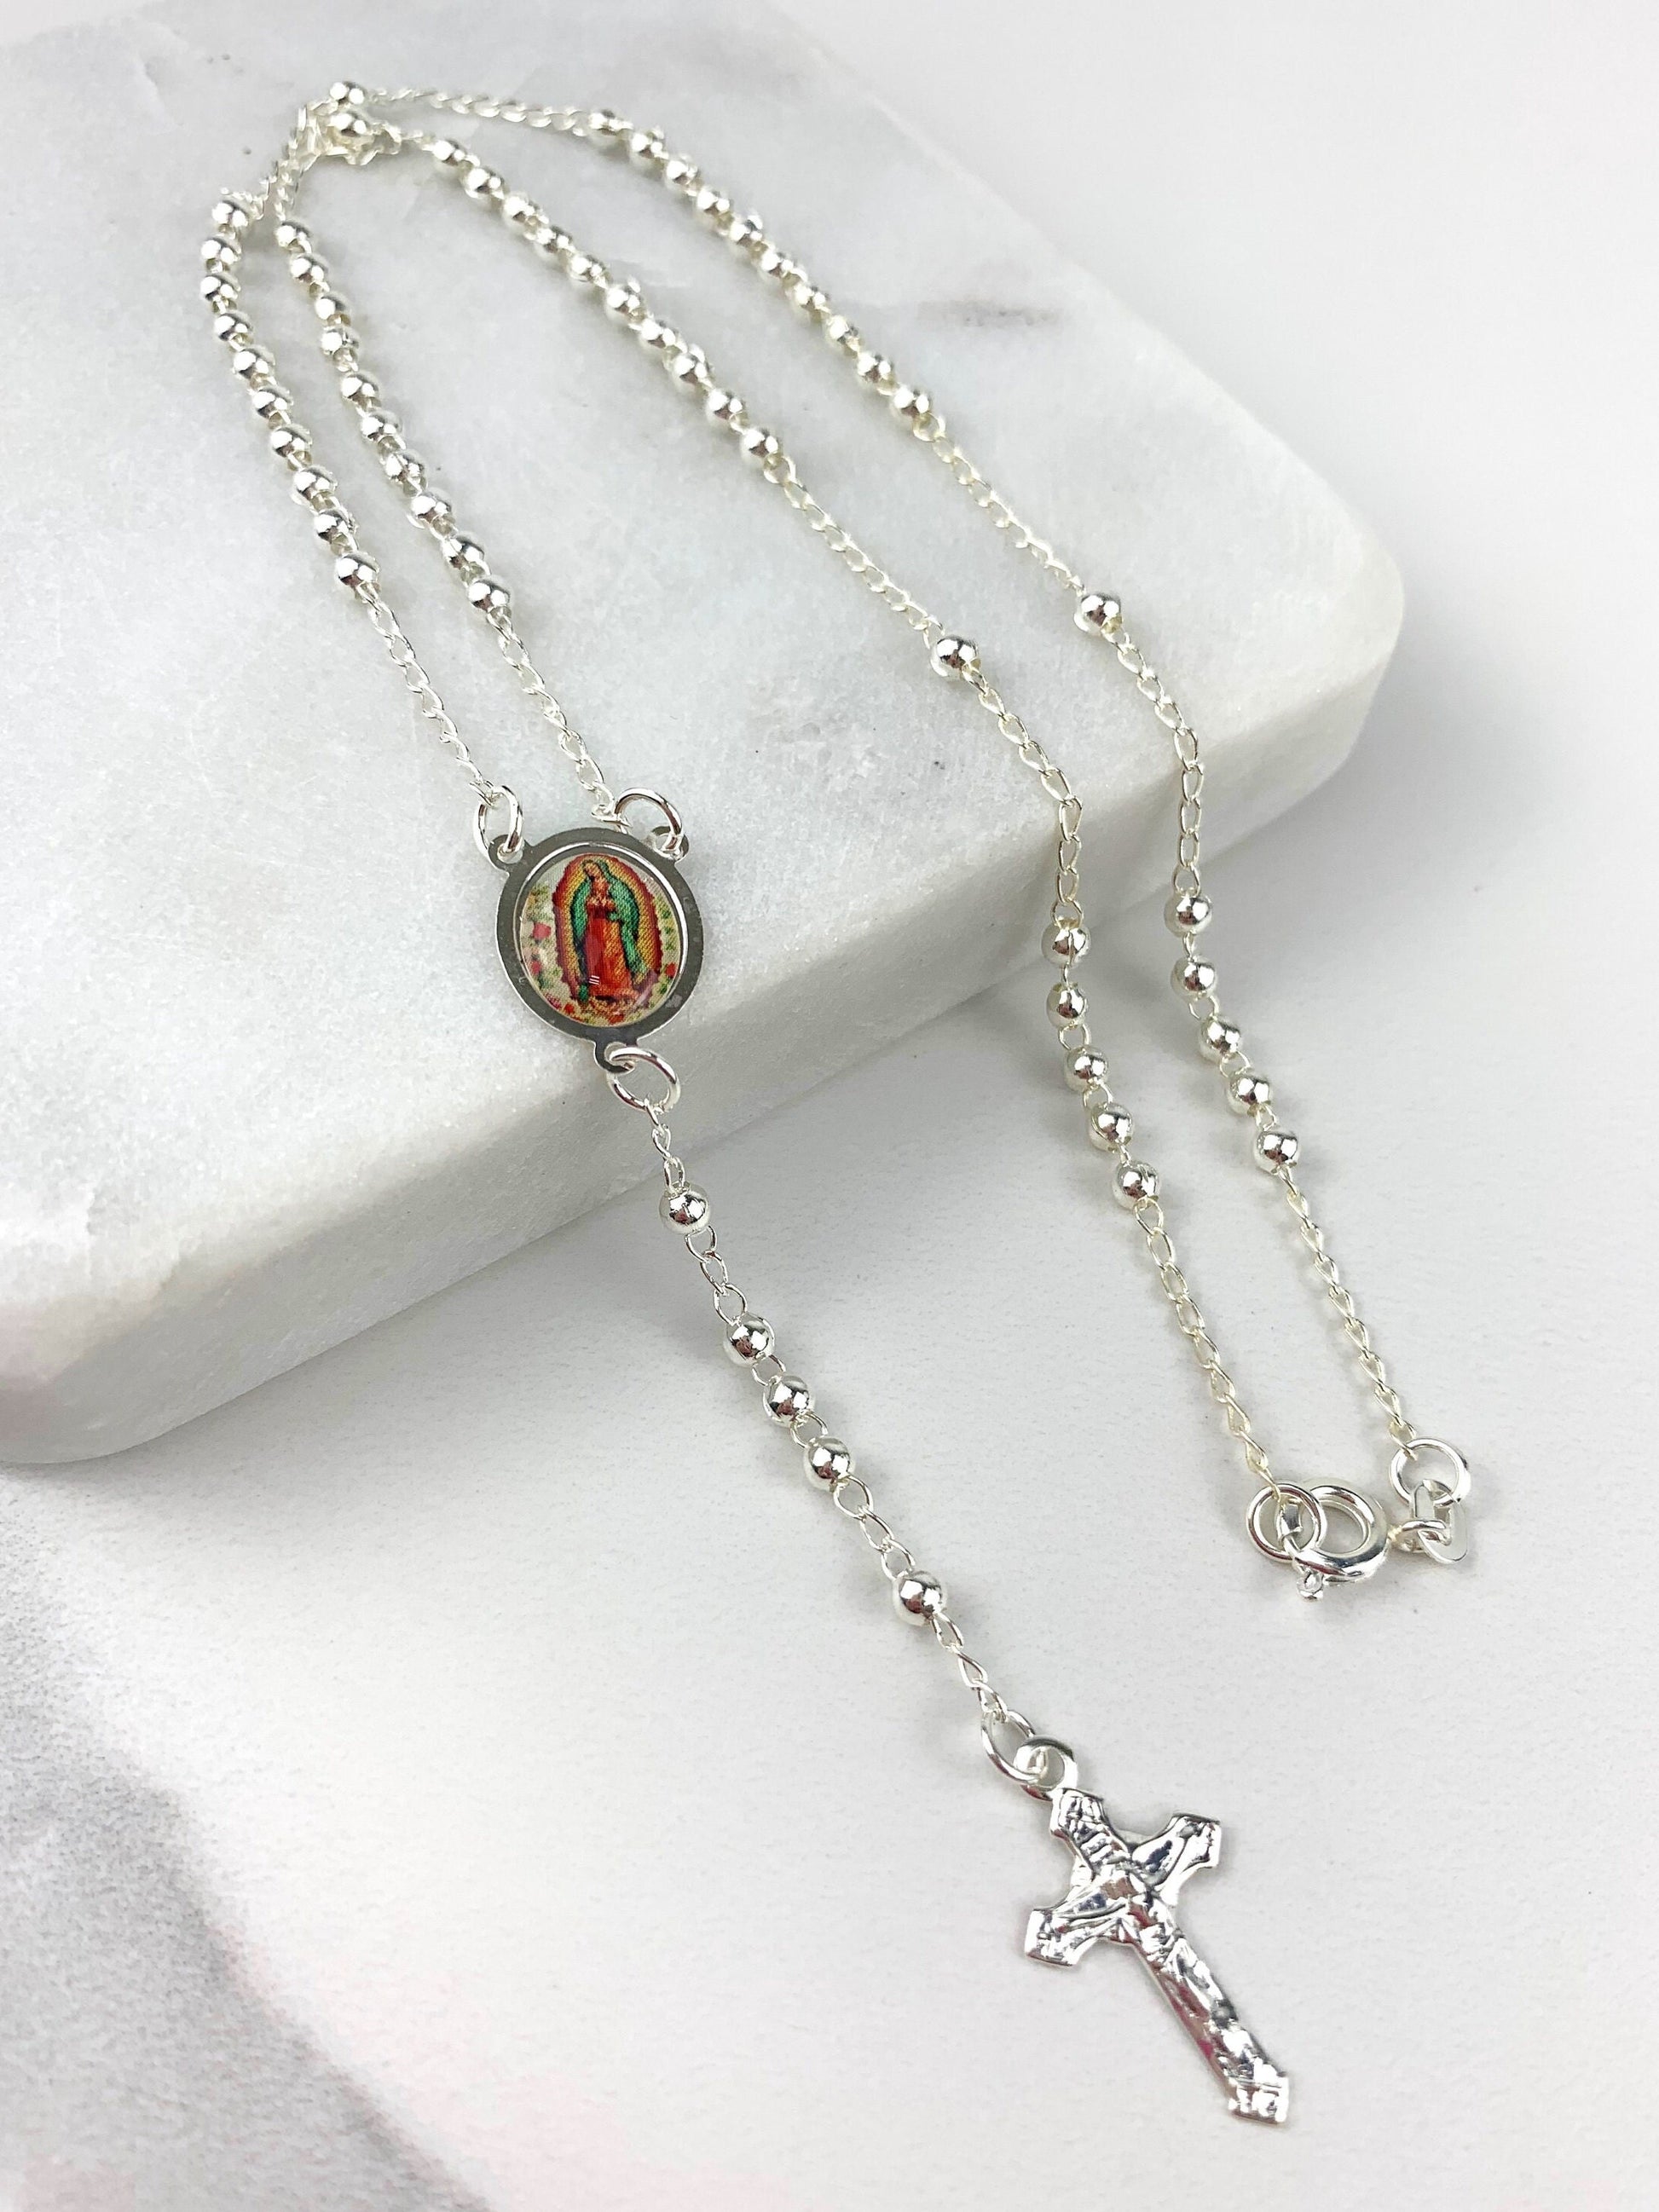 Silver Filled Beaded Chain Our Lady of Guadalupe Rosary Necklace, Religious Jewelry, Wholesale Jewelry Making Supplies